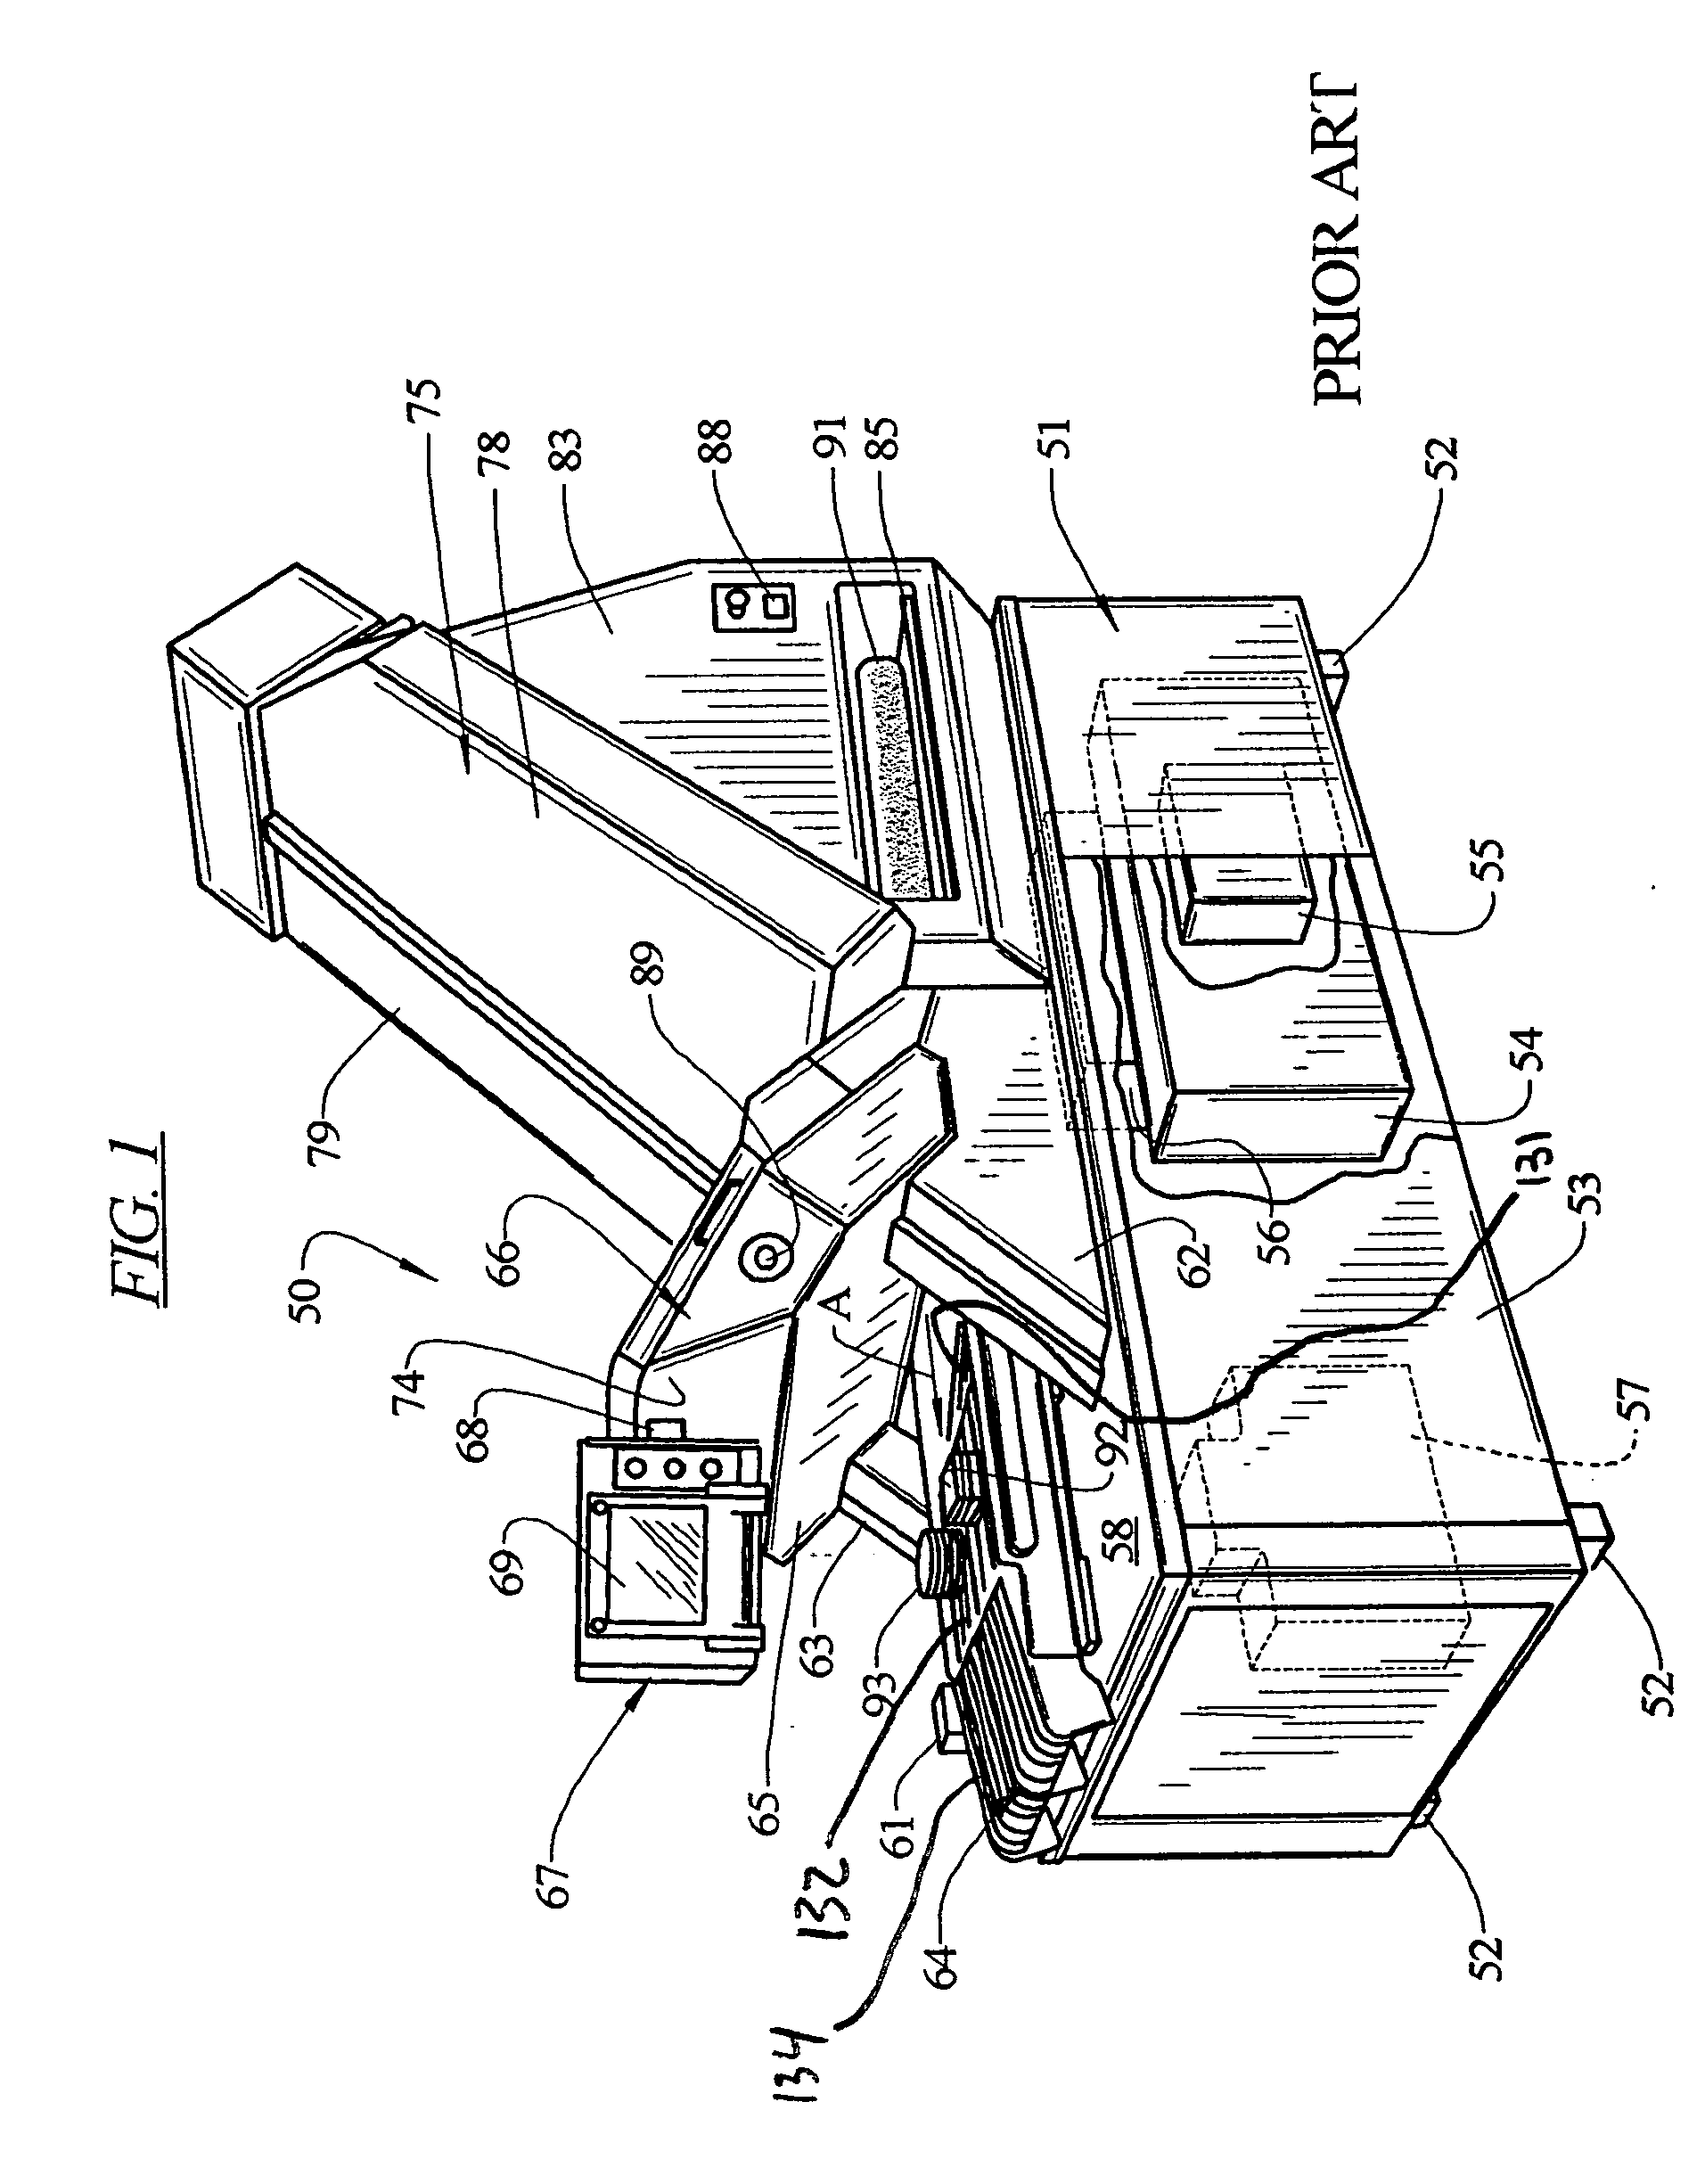 Automatic sealing arrangement for weigh scale for food processing apparatus